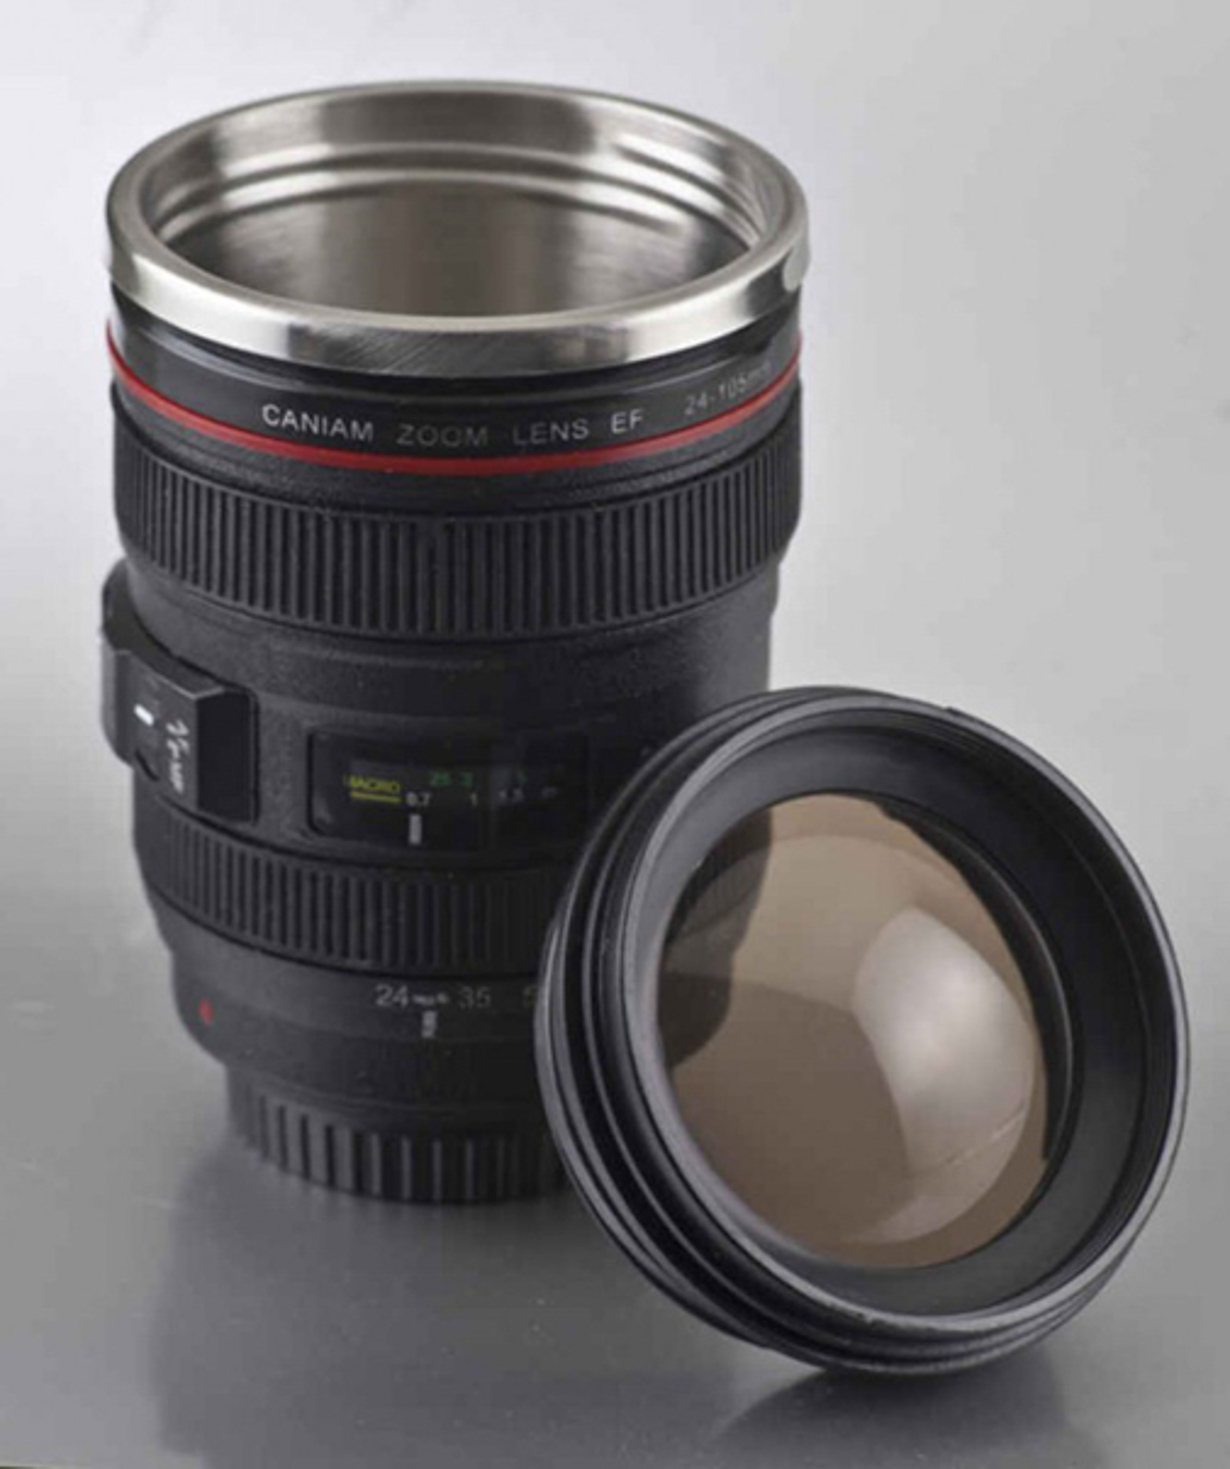 Cup «Creative Gifts» camera lens, black